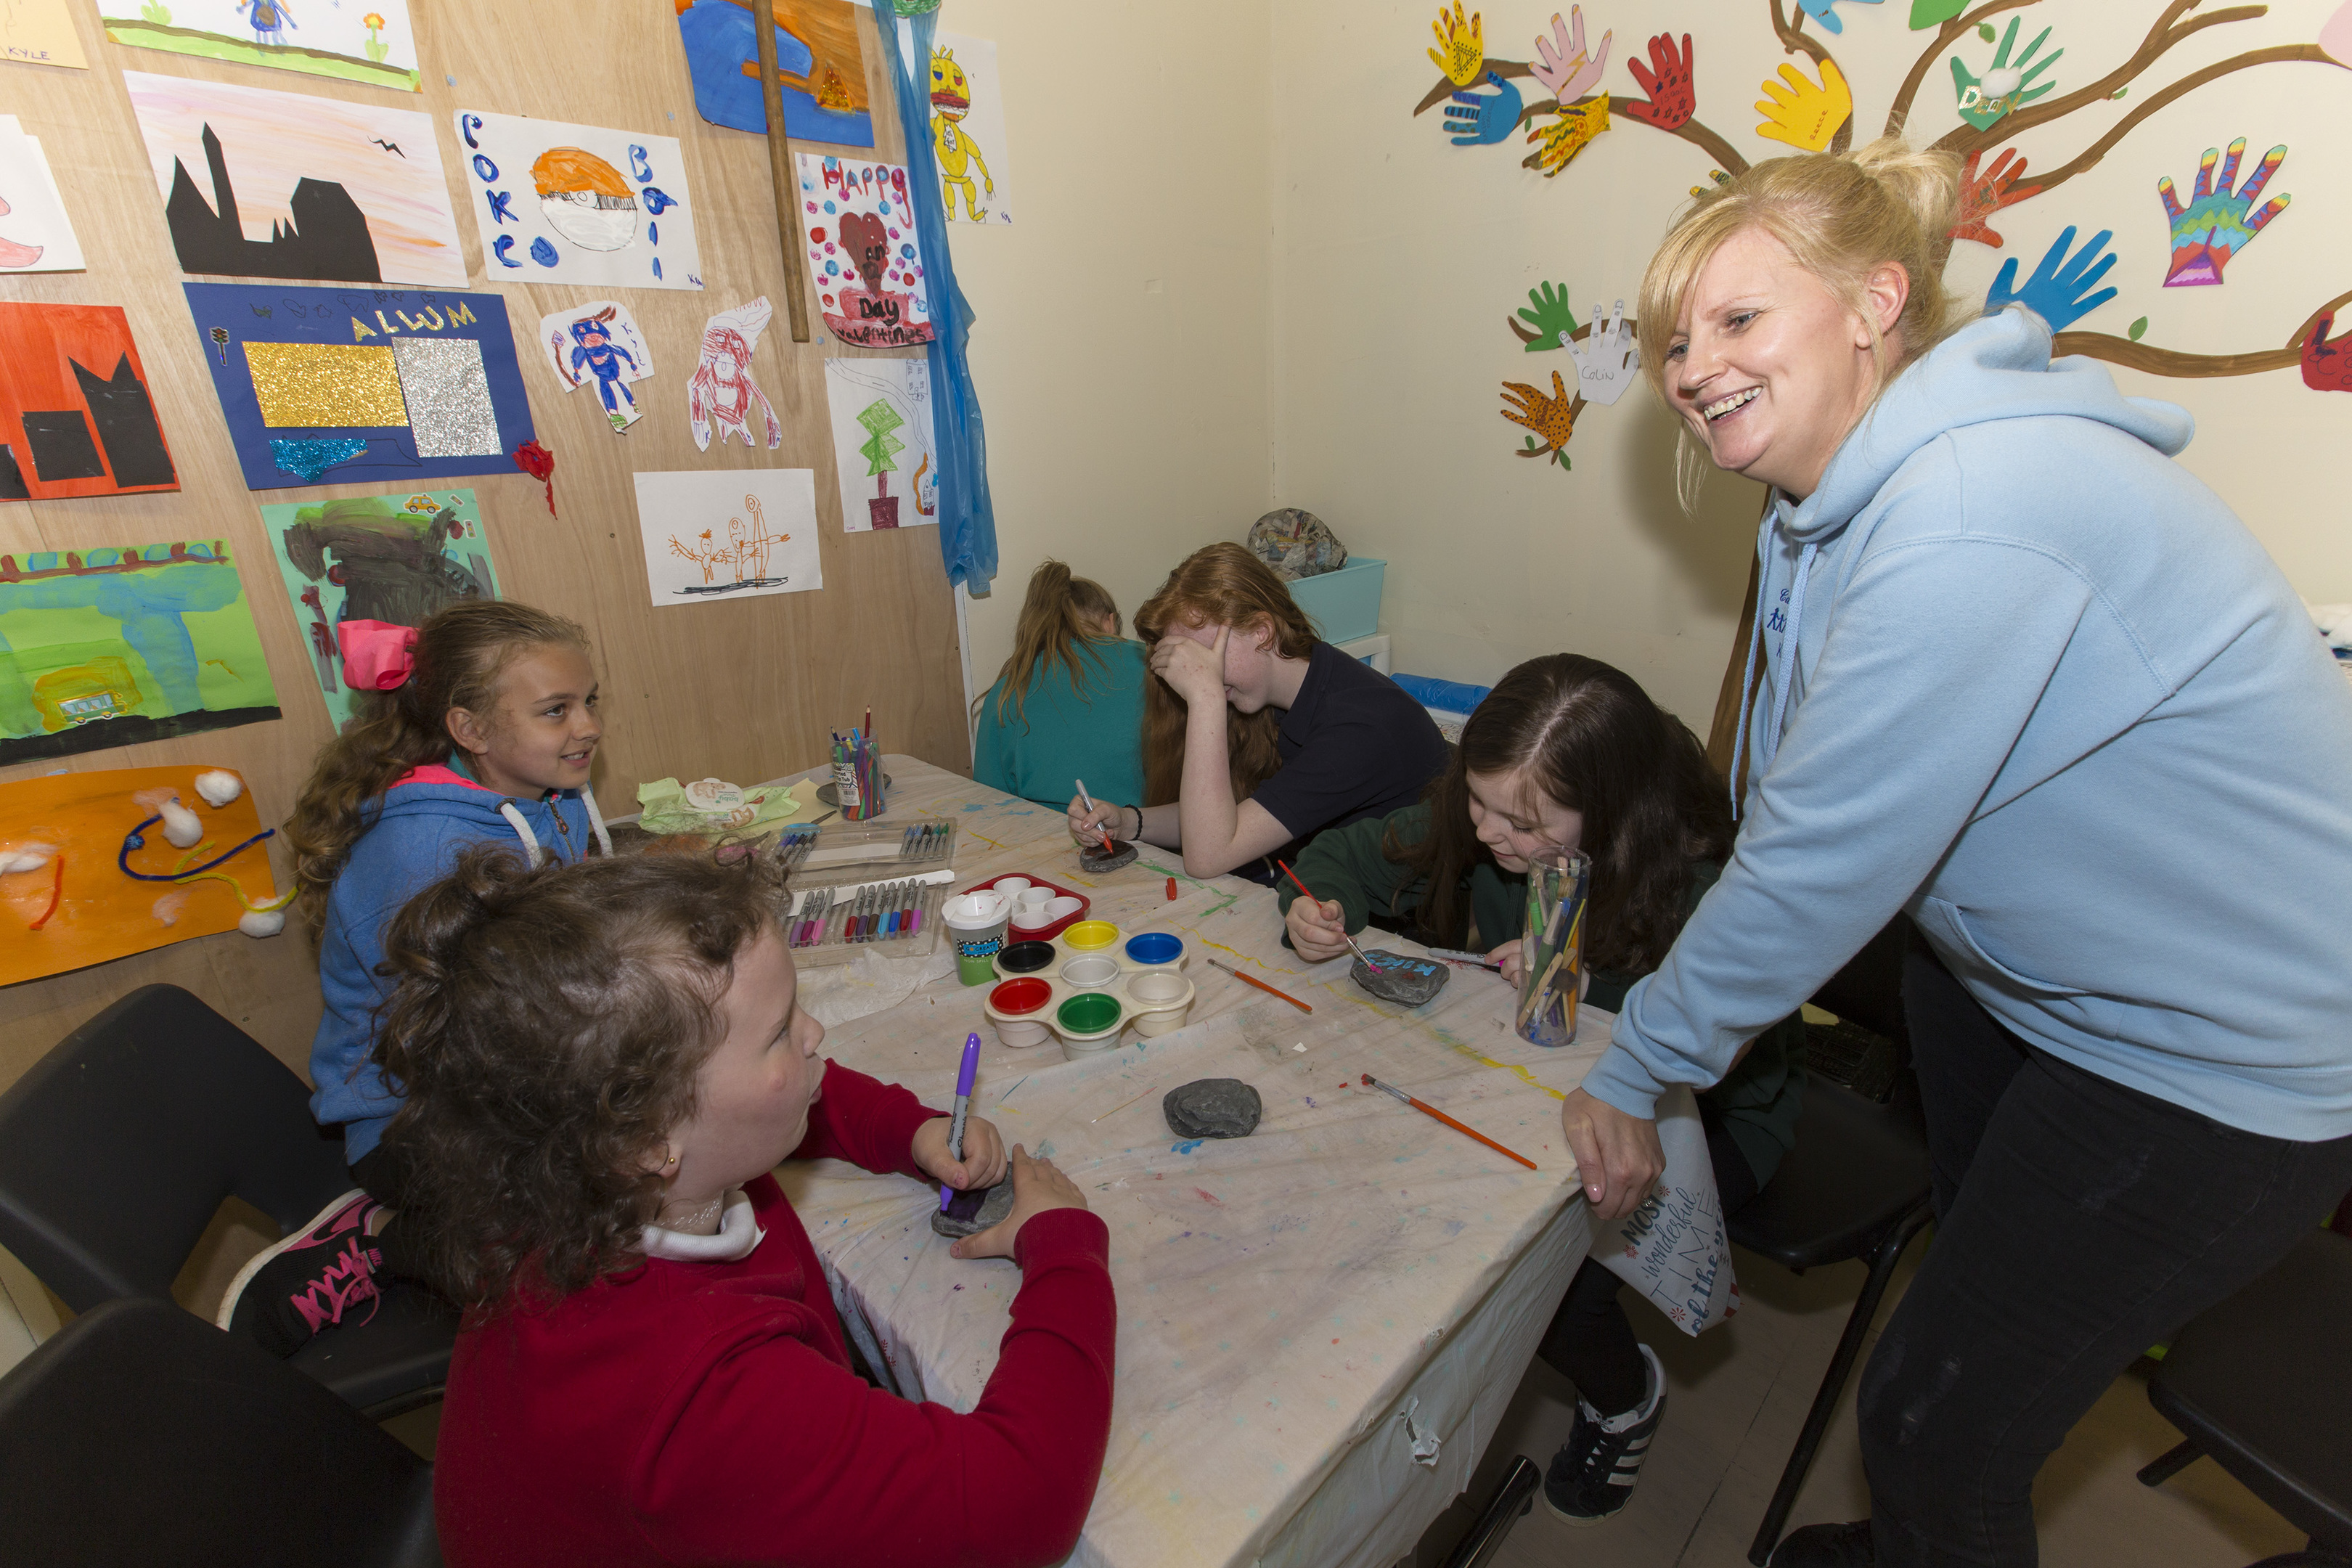 Caithness Klics project manager Wendy Thain with some of the young carers, in the art room at their Wick centre. Photo: Robert MacDonald/Northern Studios. 3 May 2018